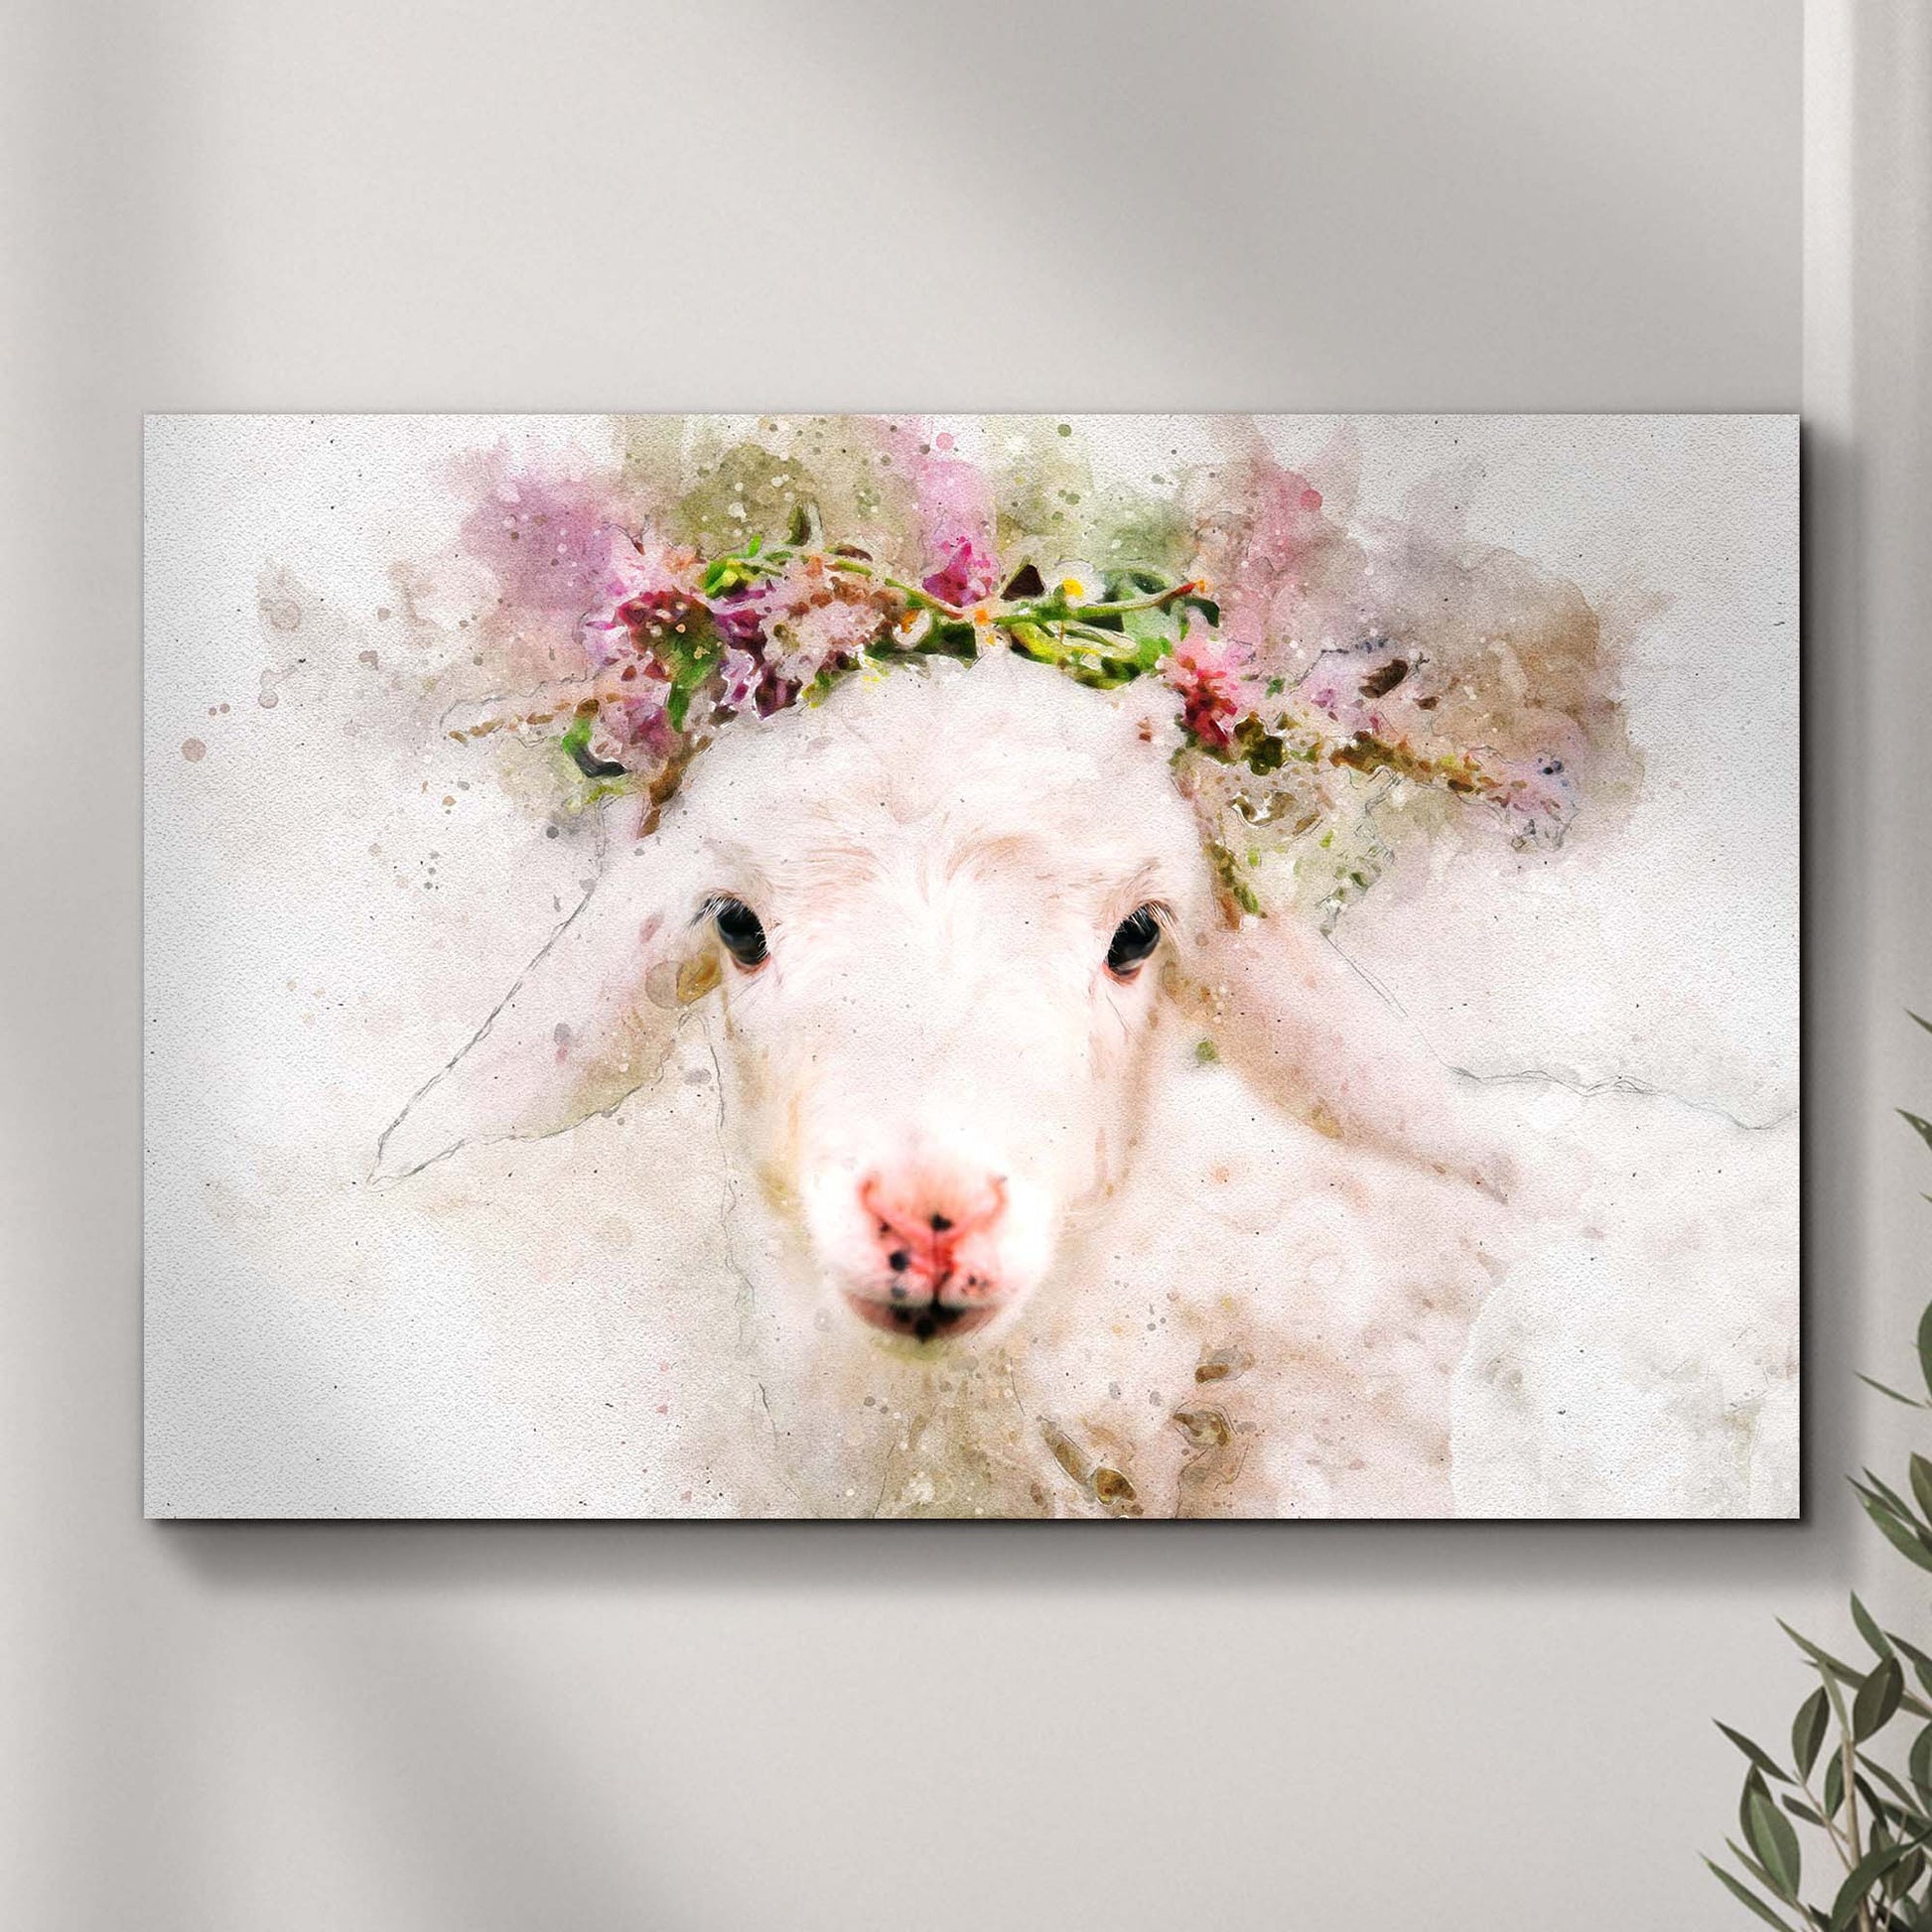 Little Sheep Flower Crown Canvas Wall Art - Image by Tailored Canvases